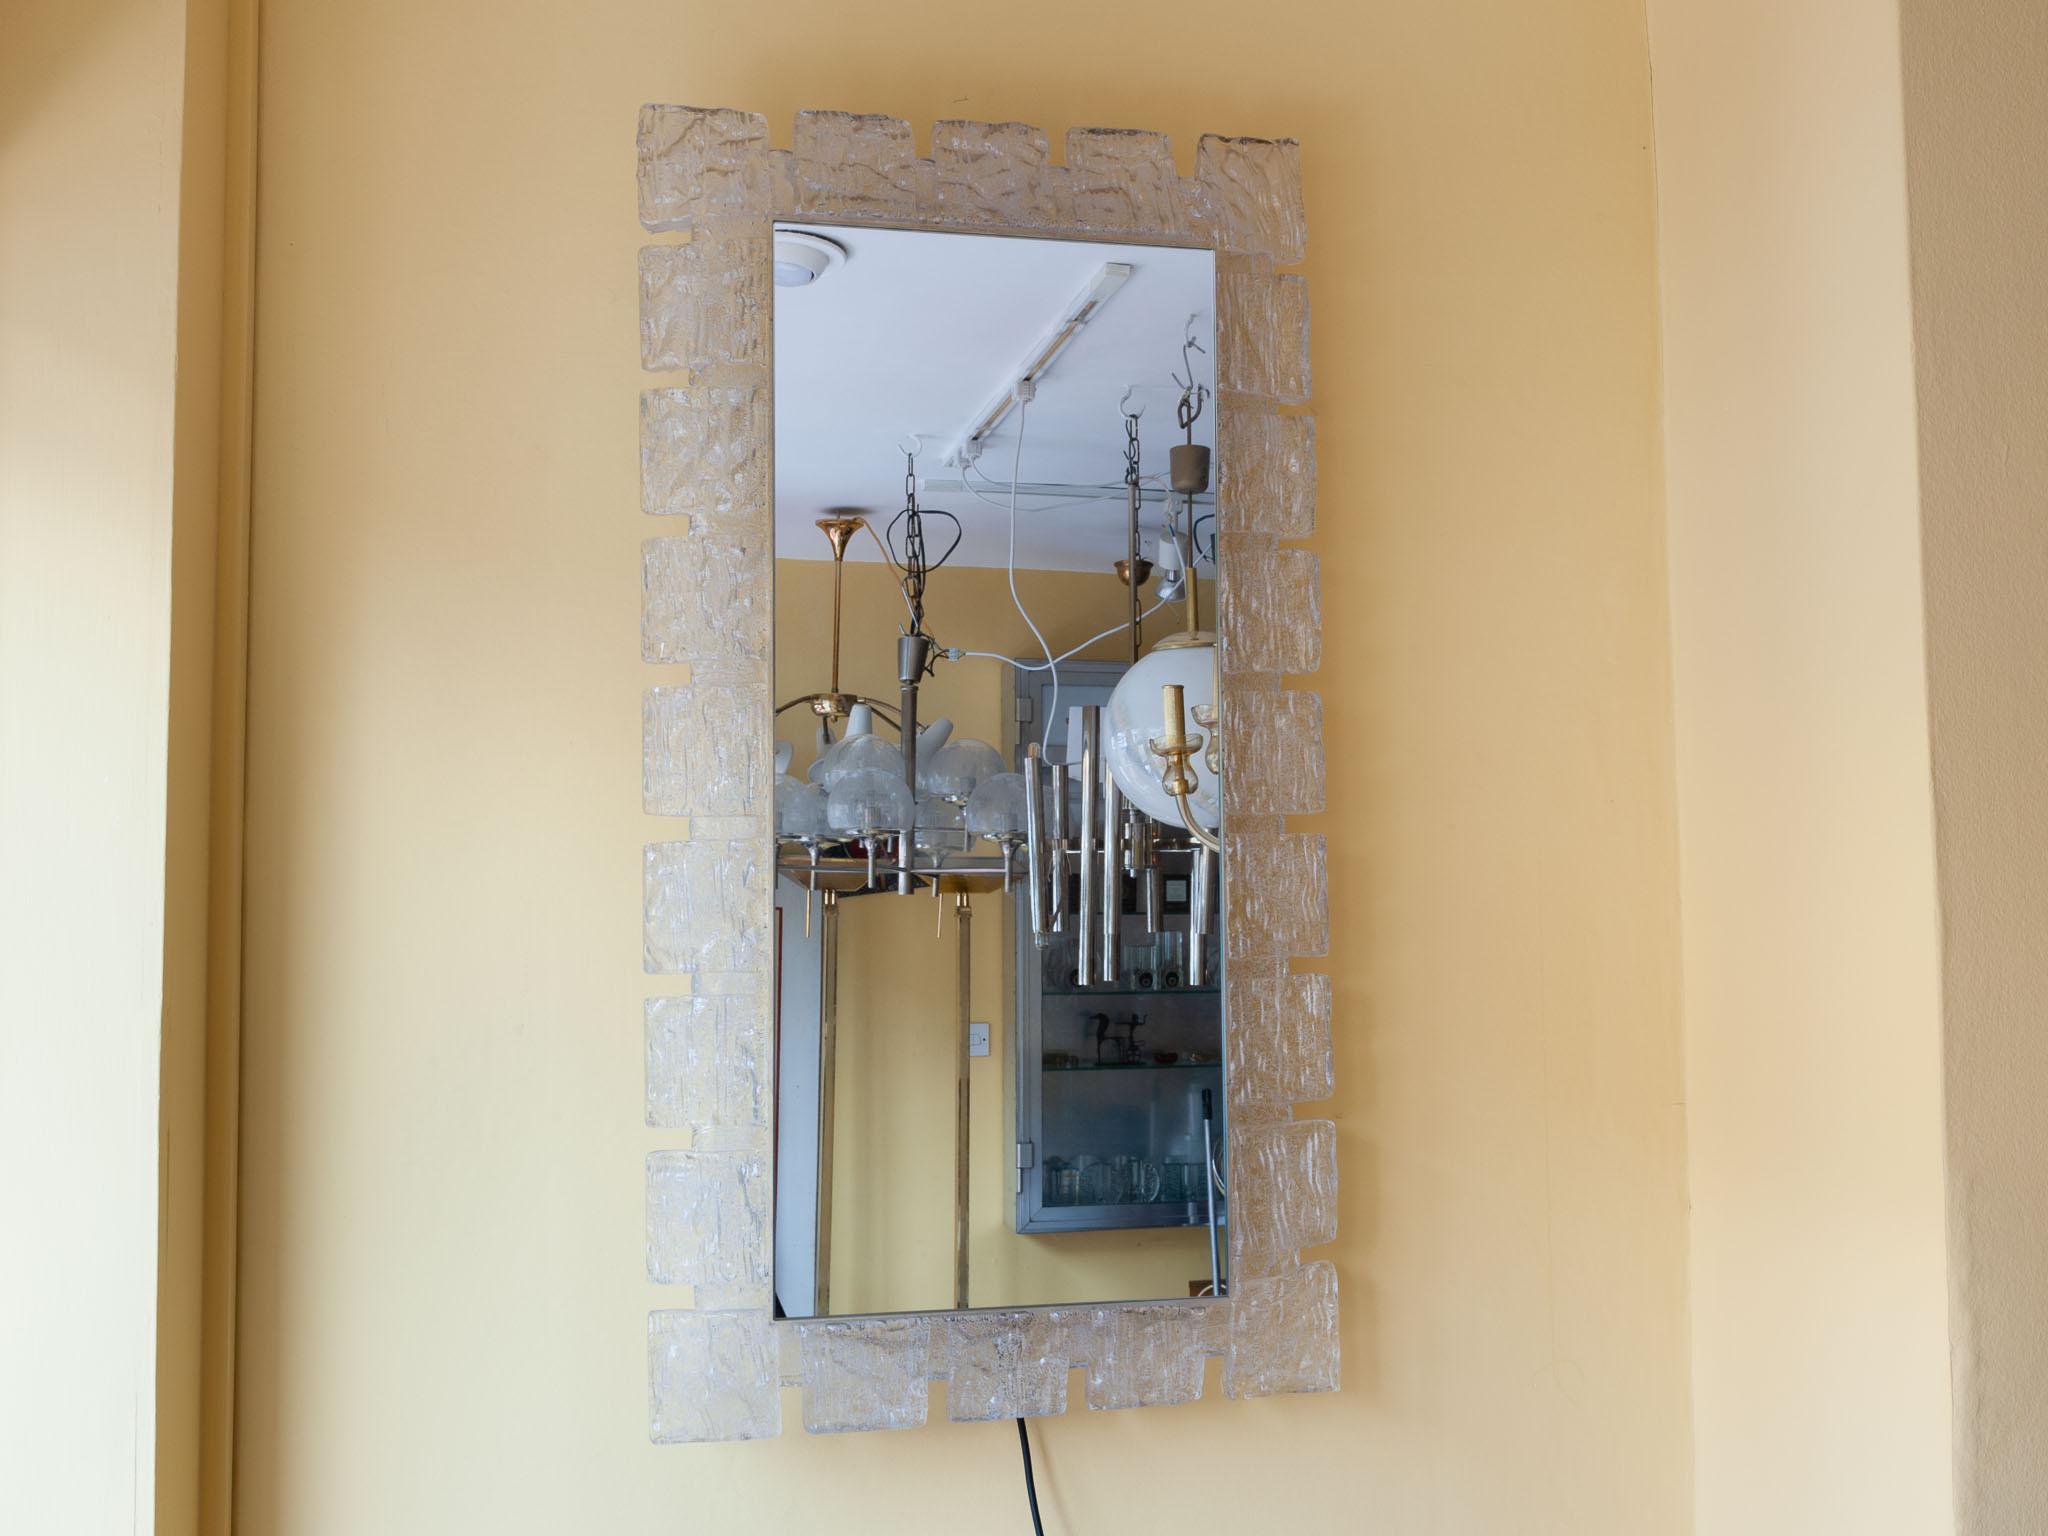 1970s German rectangular backlit wall mirror by Hillebrand. The rectangular mirror is surrounded by a frosted iced geometric frame which hook son to a white metal base which holds the bulbs behind. The frame holds 8 small screw in lightbulbs. In